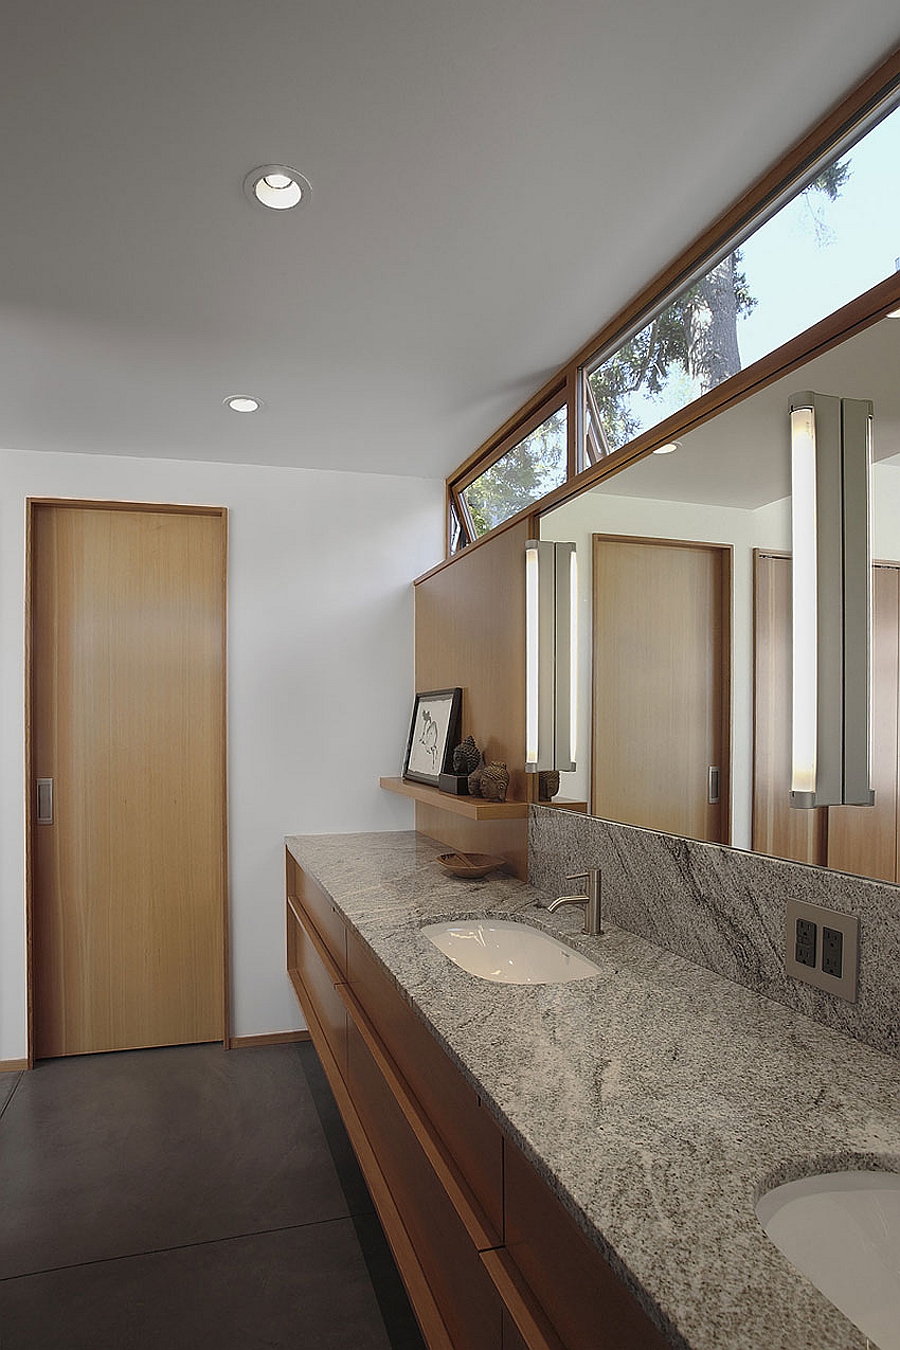 Contemporary bathroom with ample natural ventilation